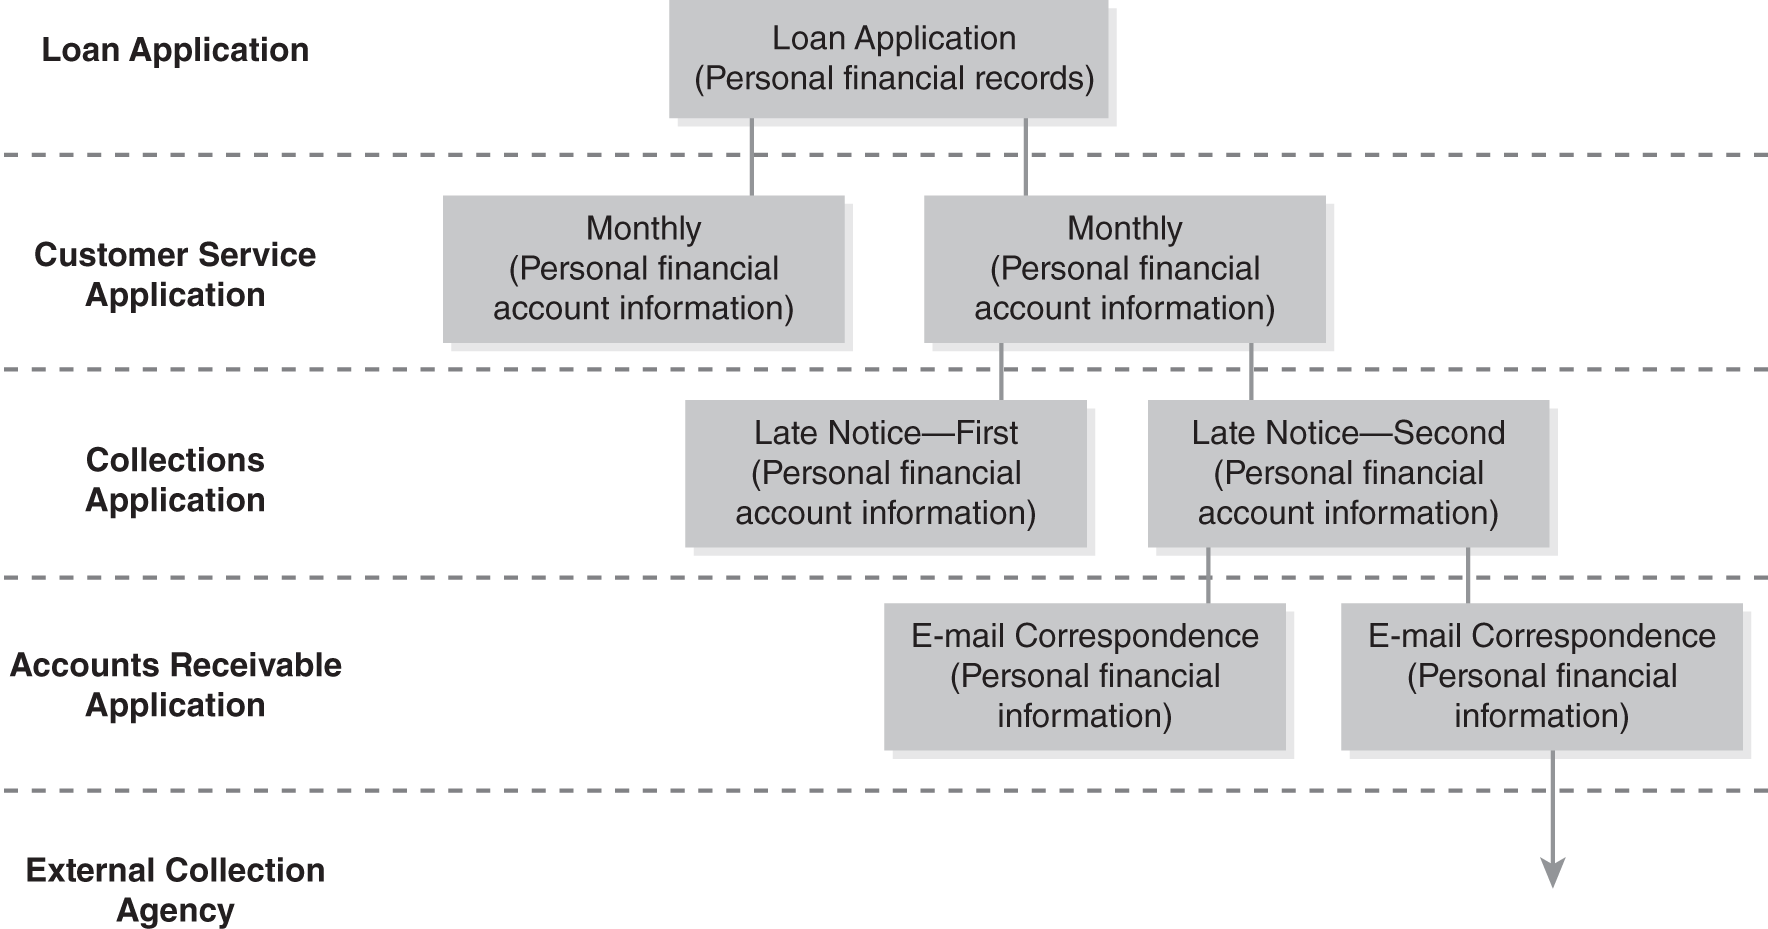 An illustration of how data quickly expands in context of a loan document. 